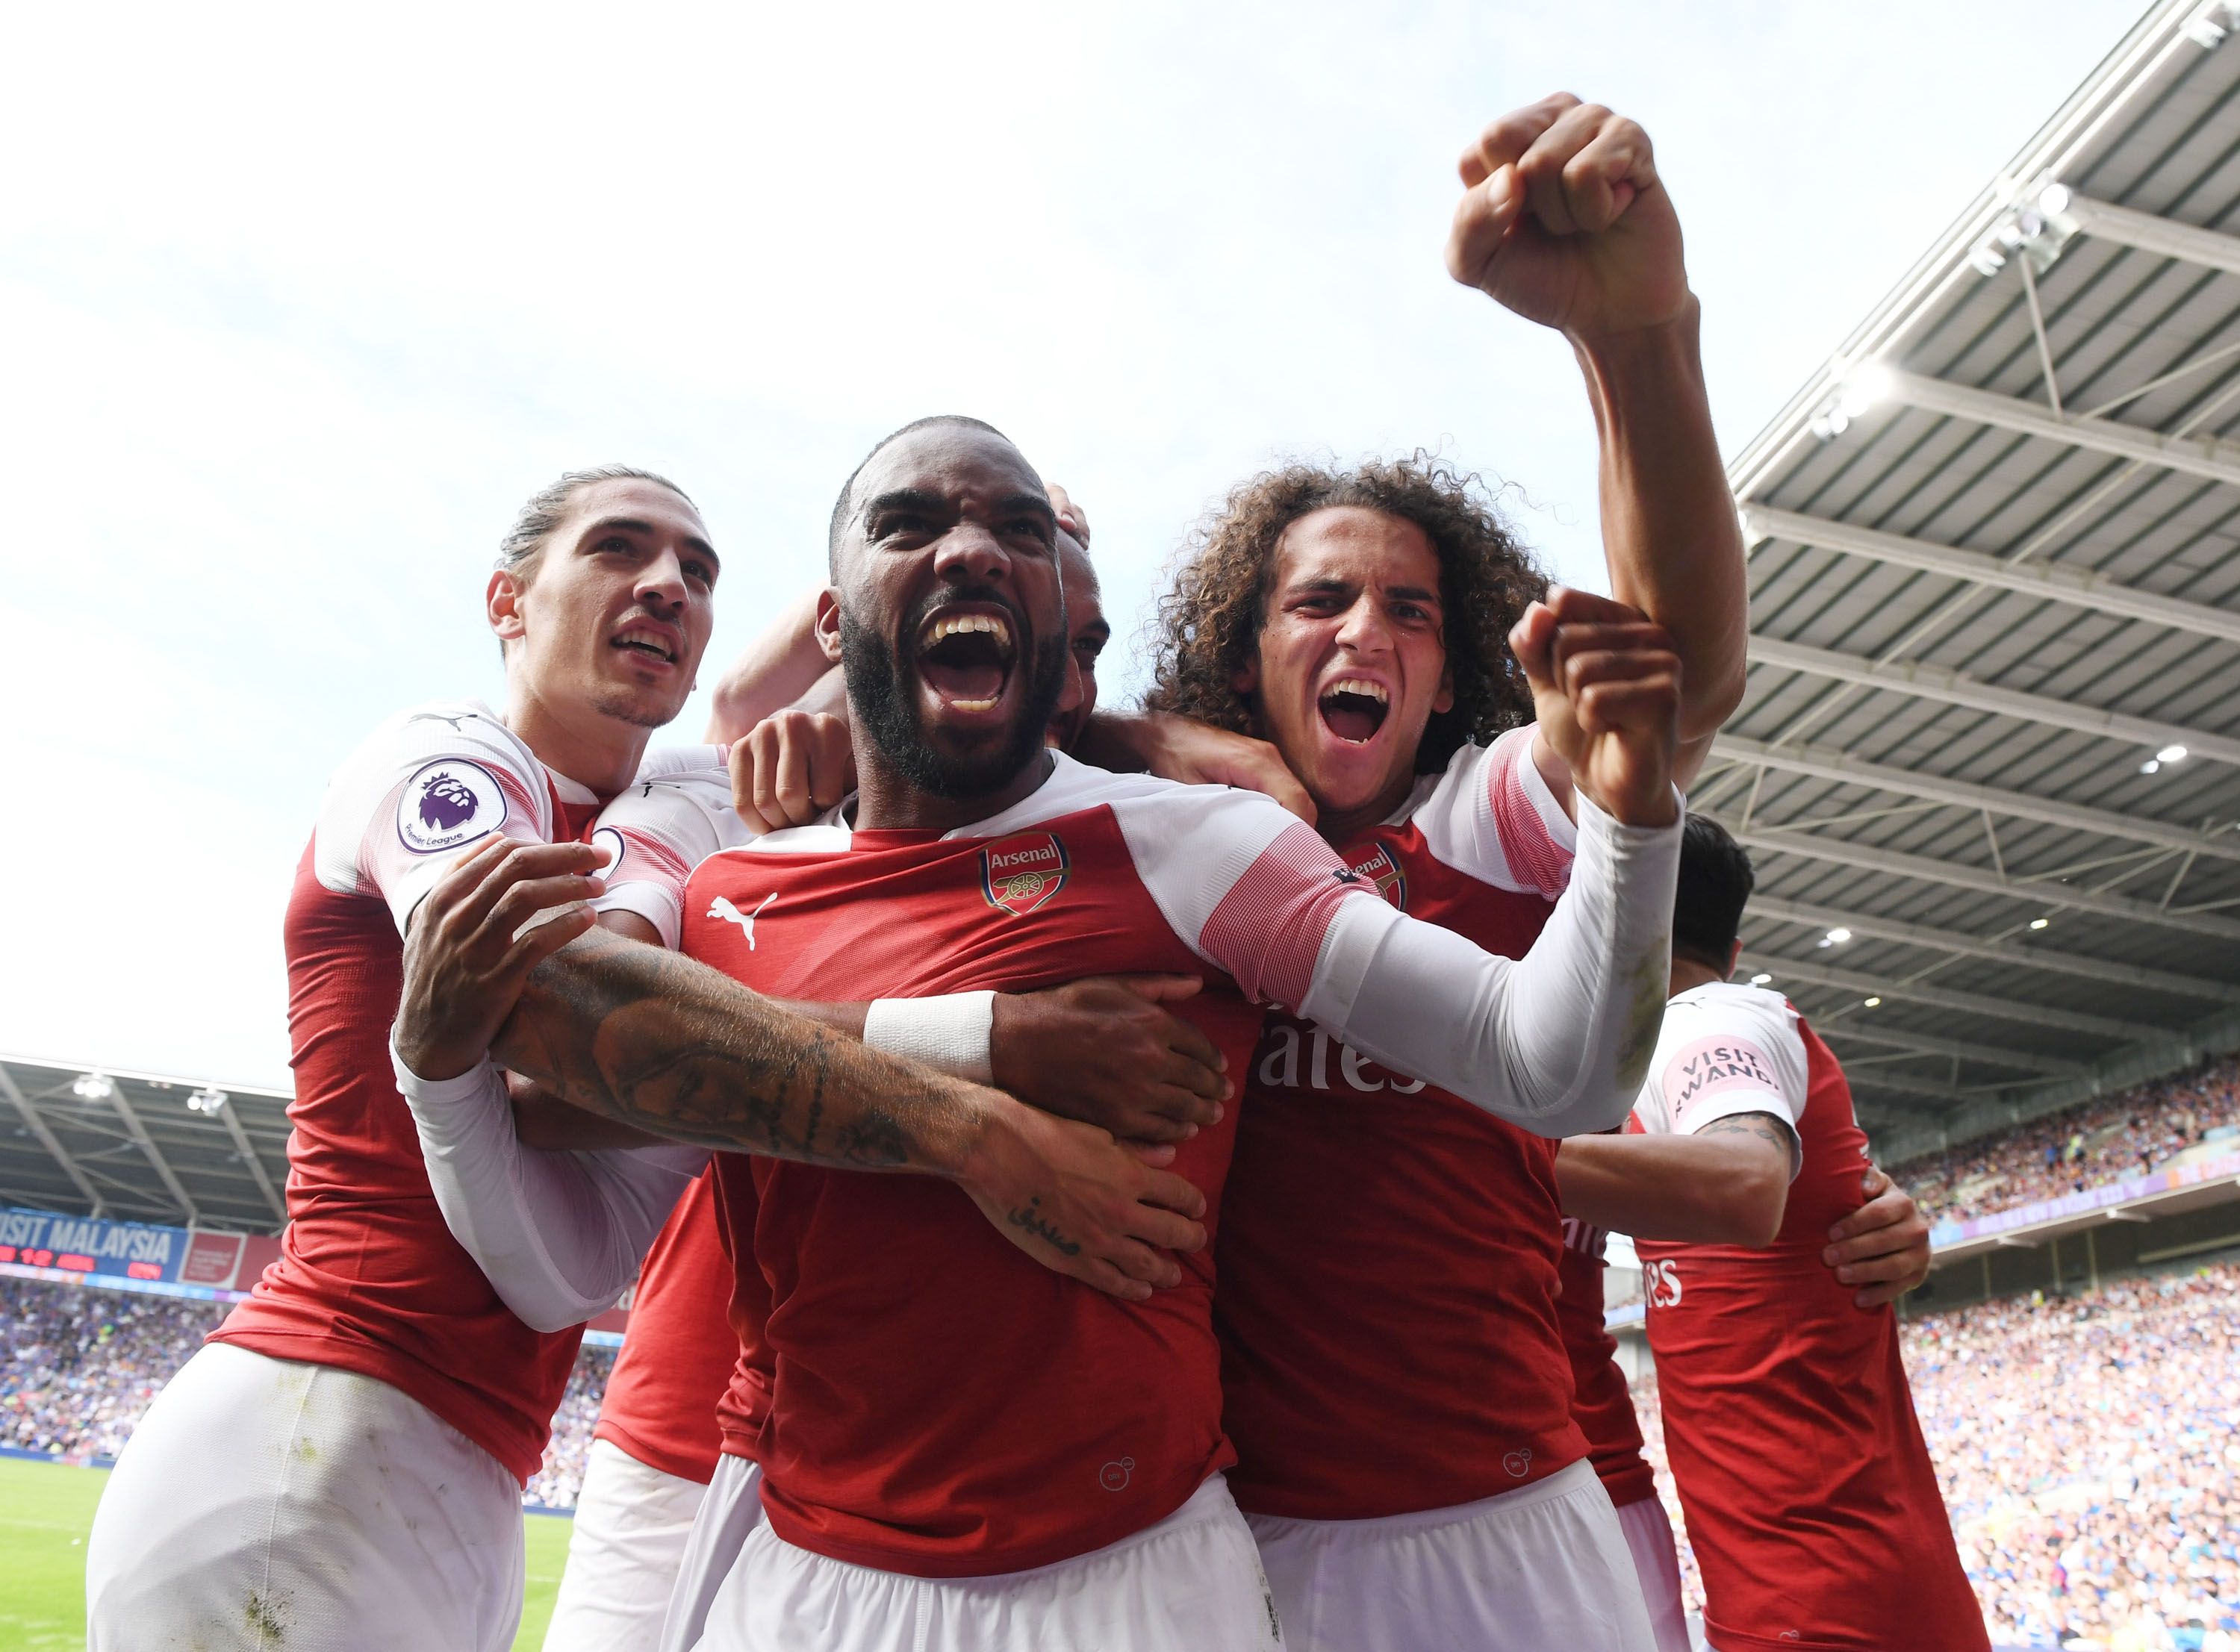 Catch the North London Derby with the NOW TV Sky Sports Pass